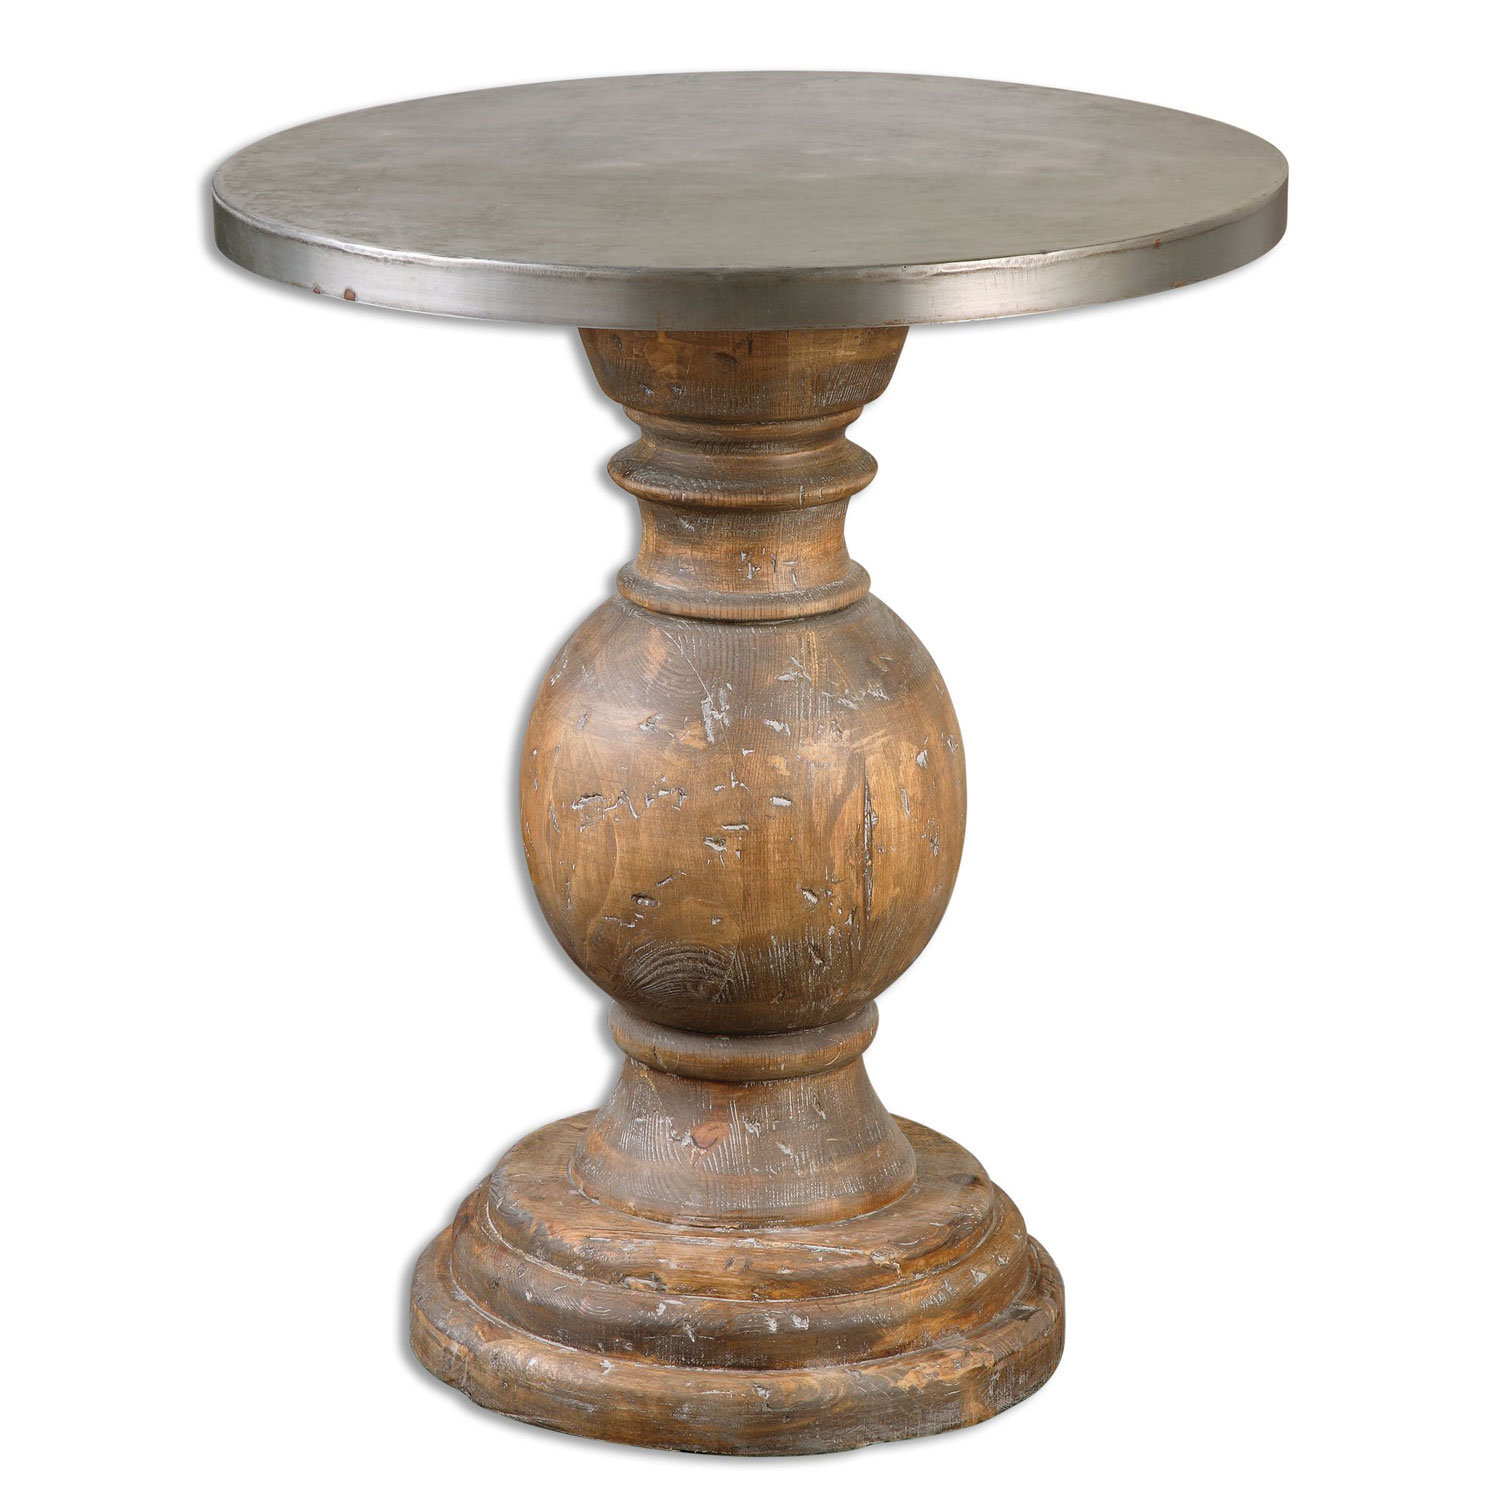 uttermost blythe reclaimed fir wood accent table bellacor natural hover zoom dark brown end tables retro console small low pier one outdoor furniture decorative nautical lanterns